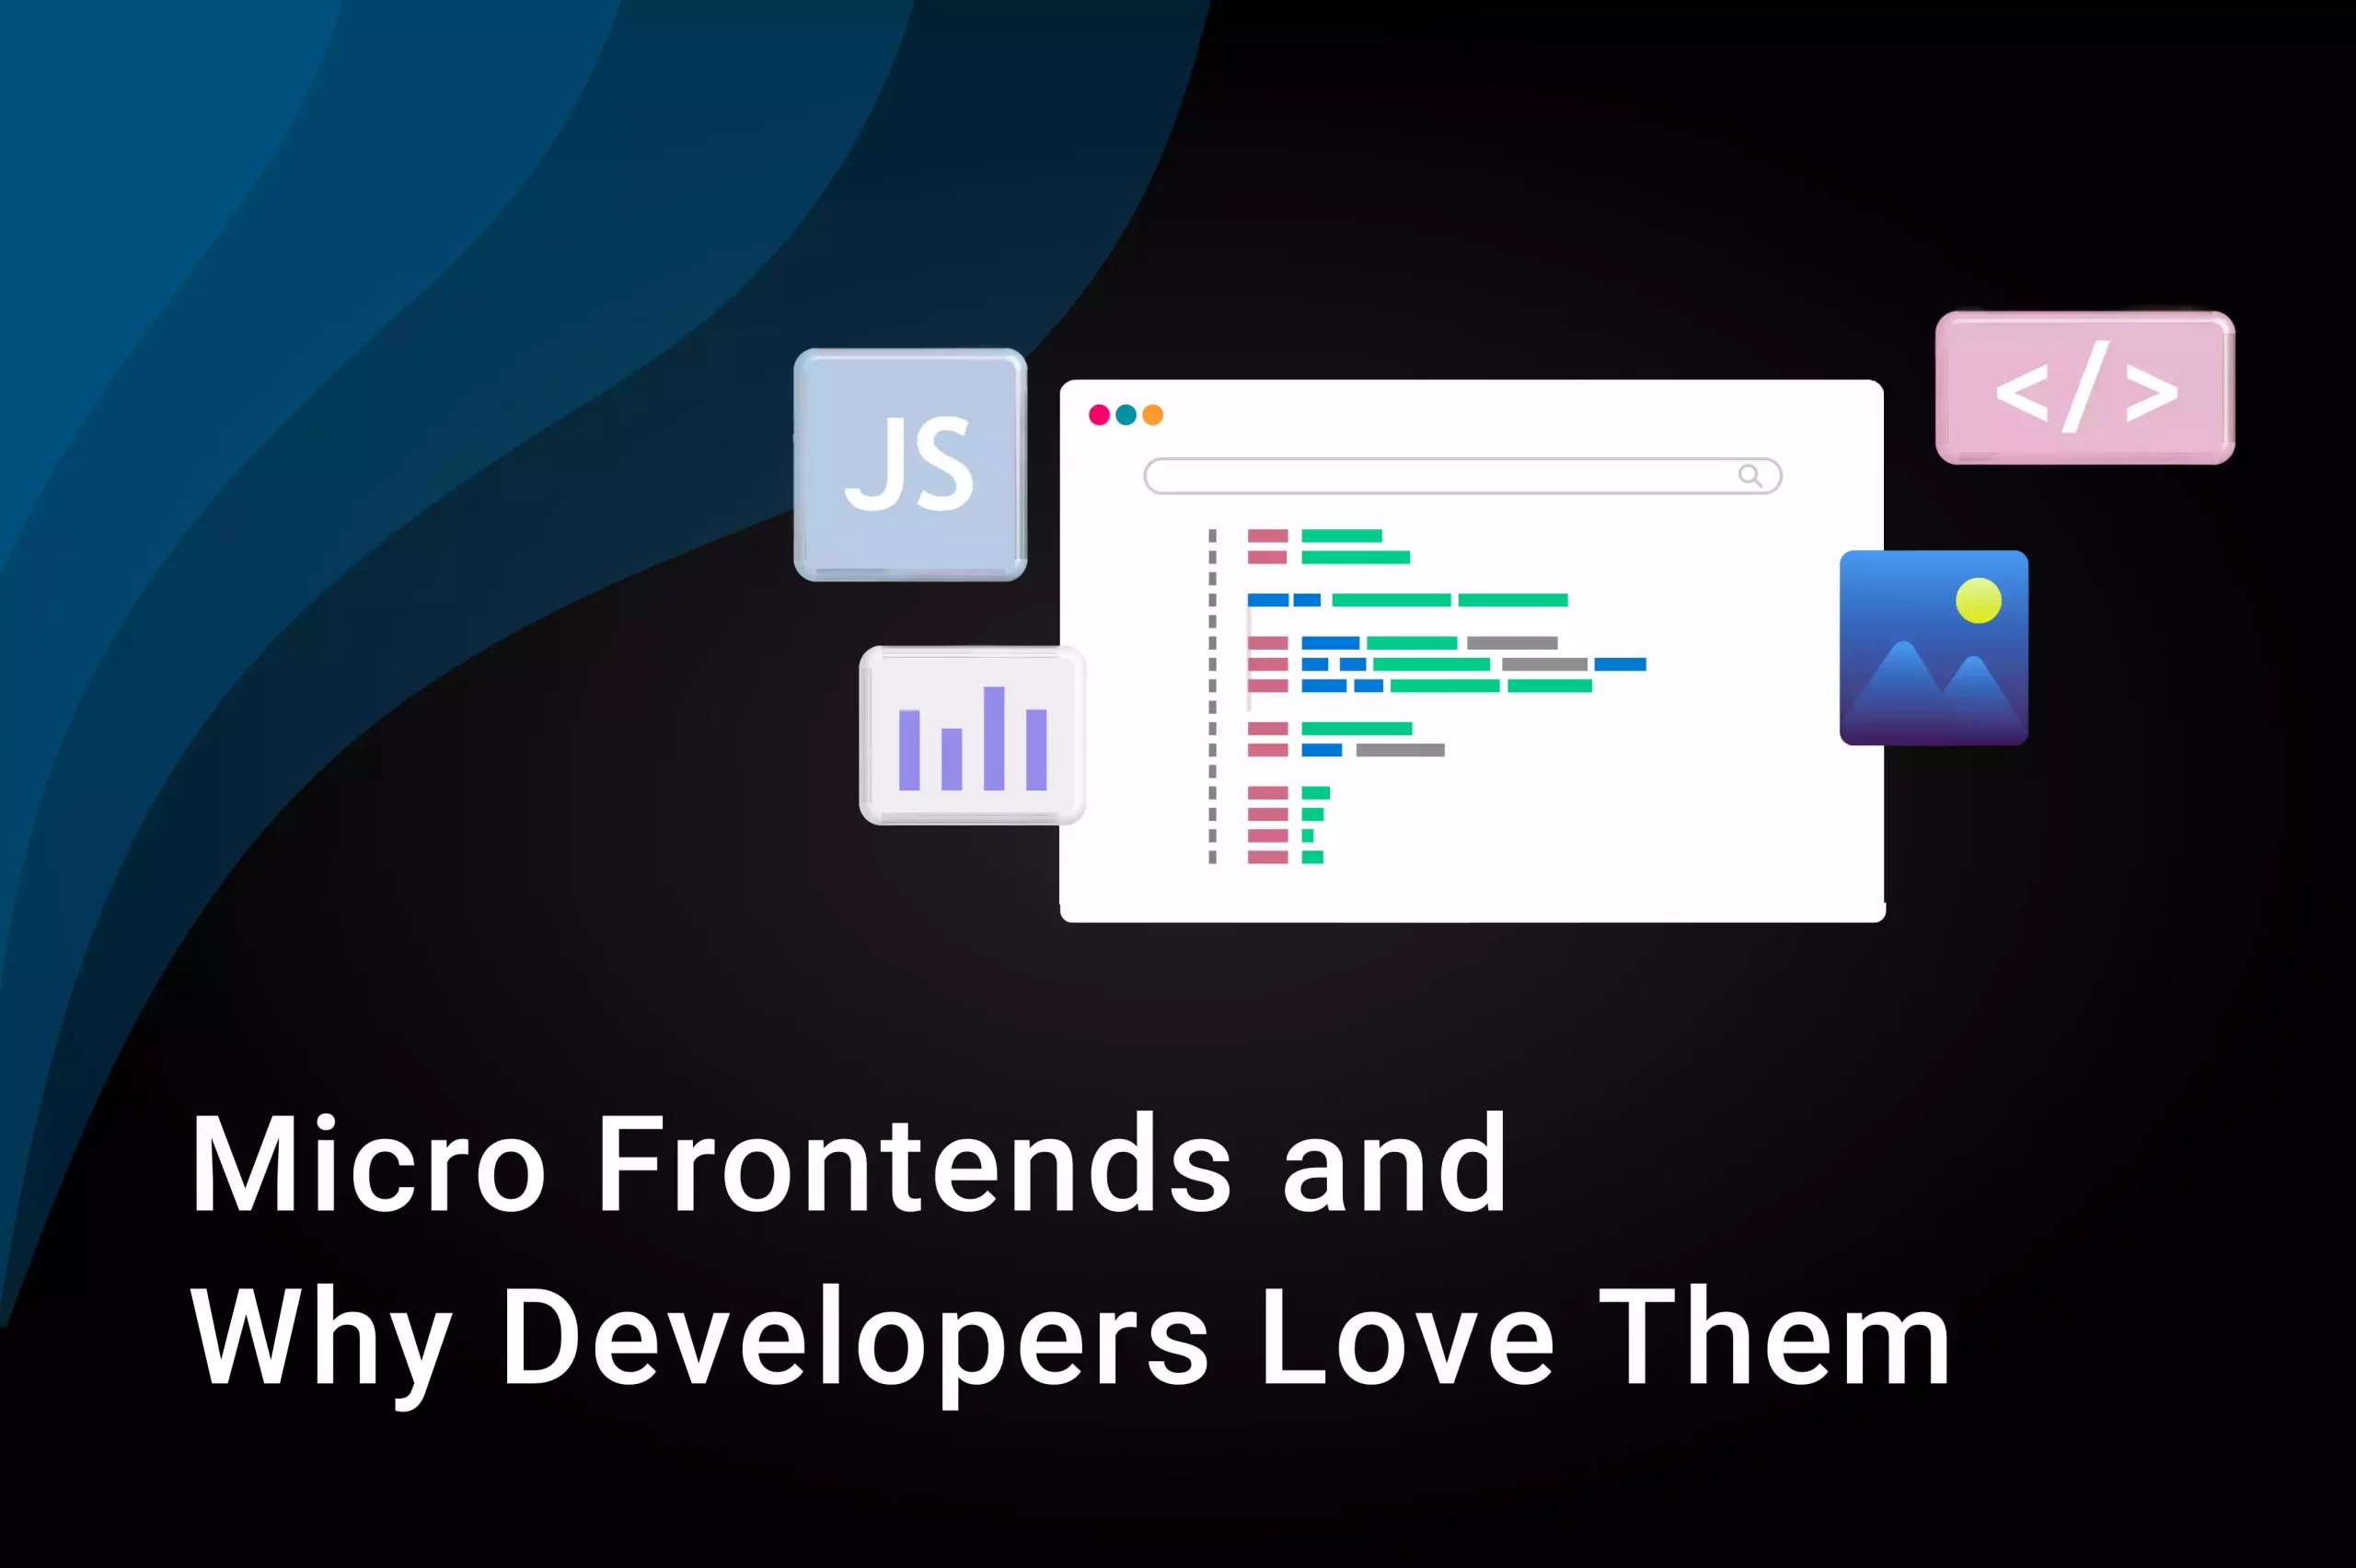 What Are Micro Frontends and Why Developers Love Them?